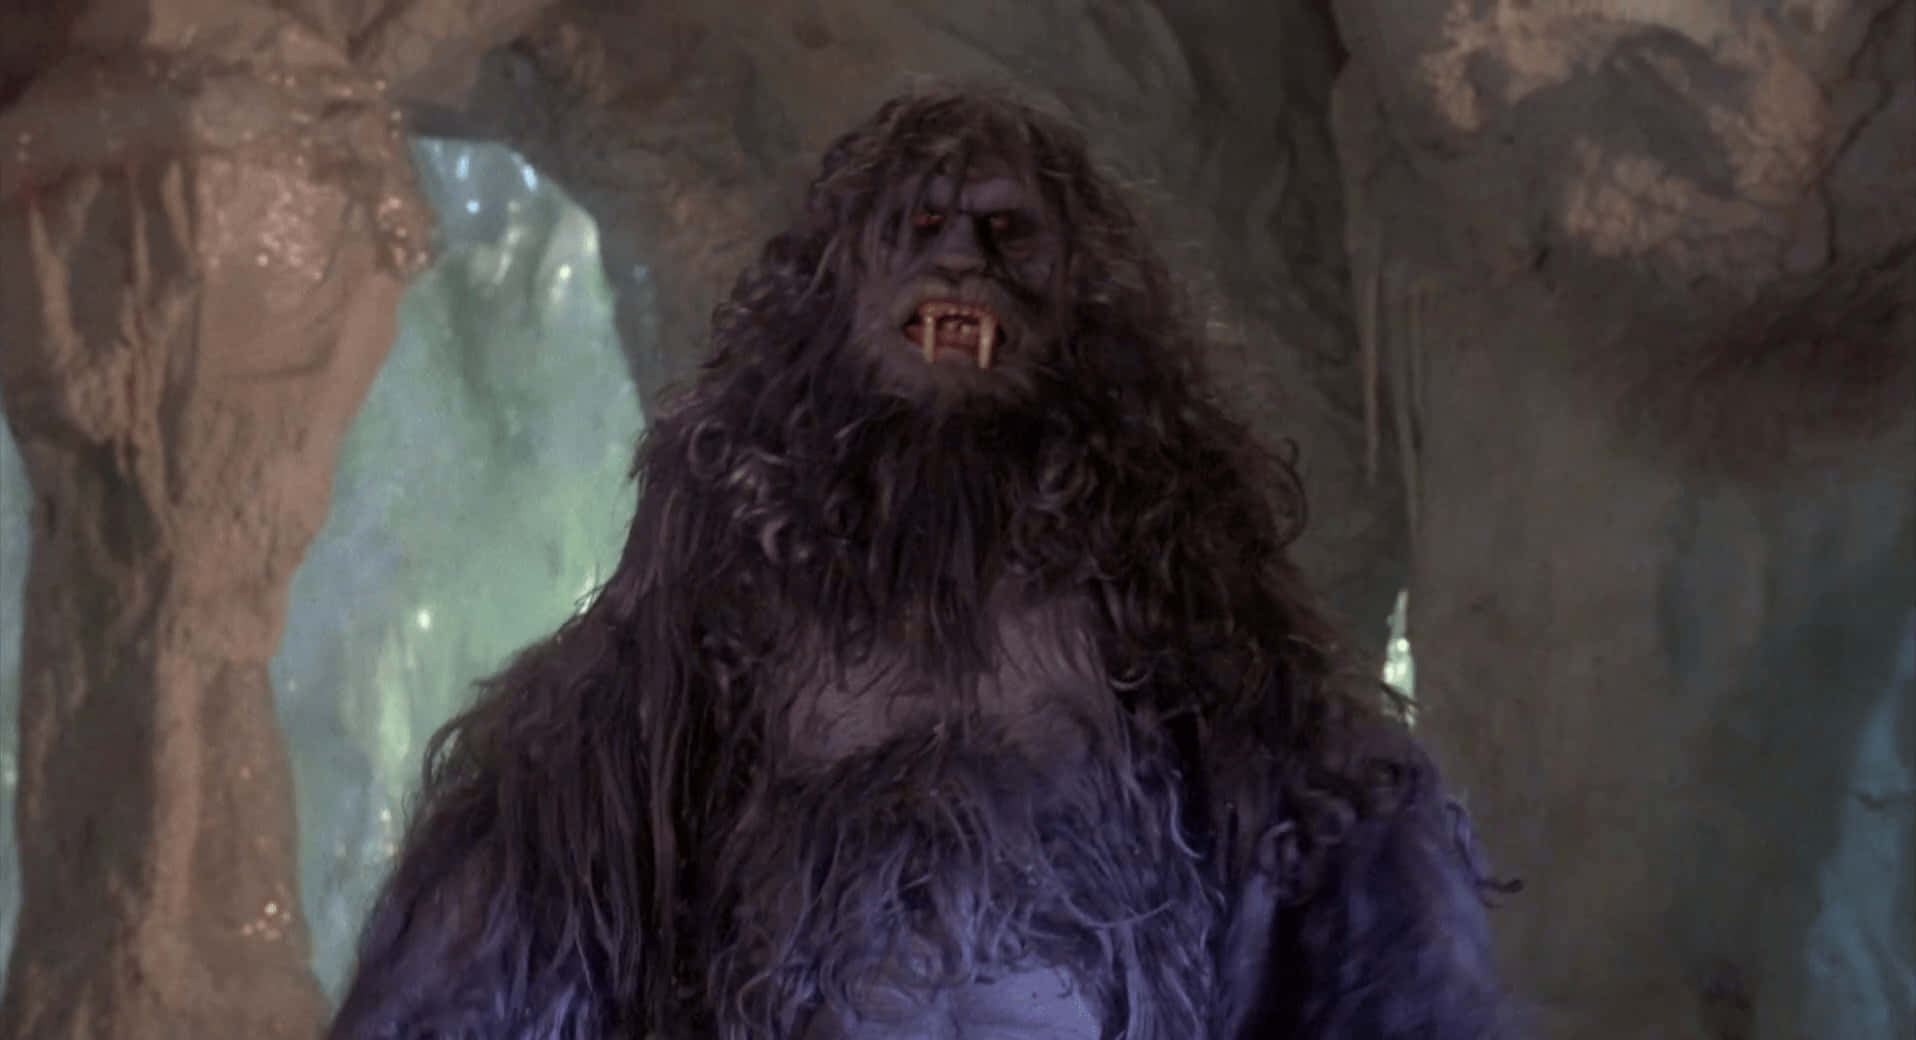 A Large Creature With Long Hair And A Beard